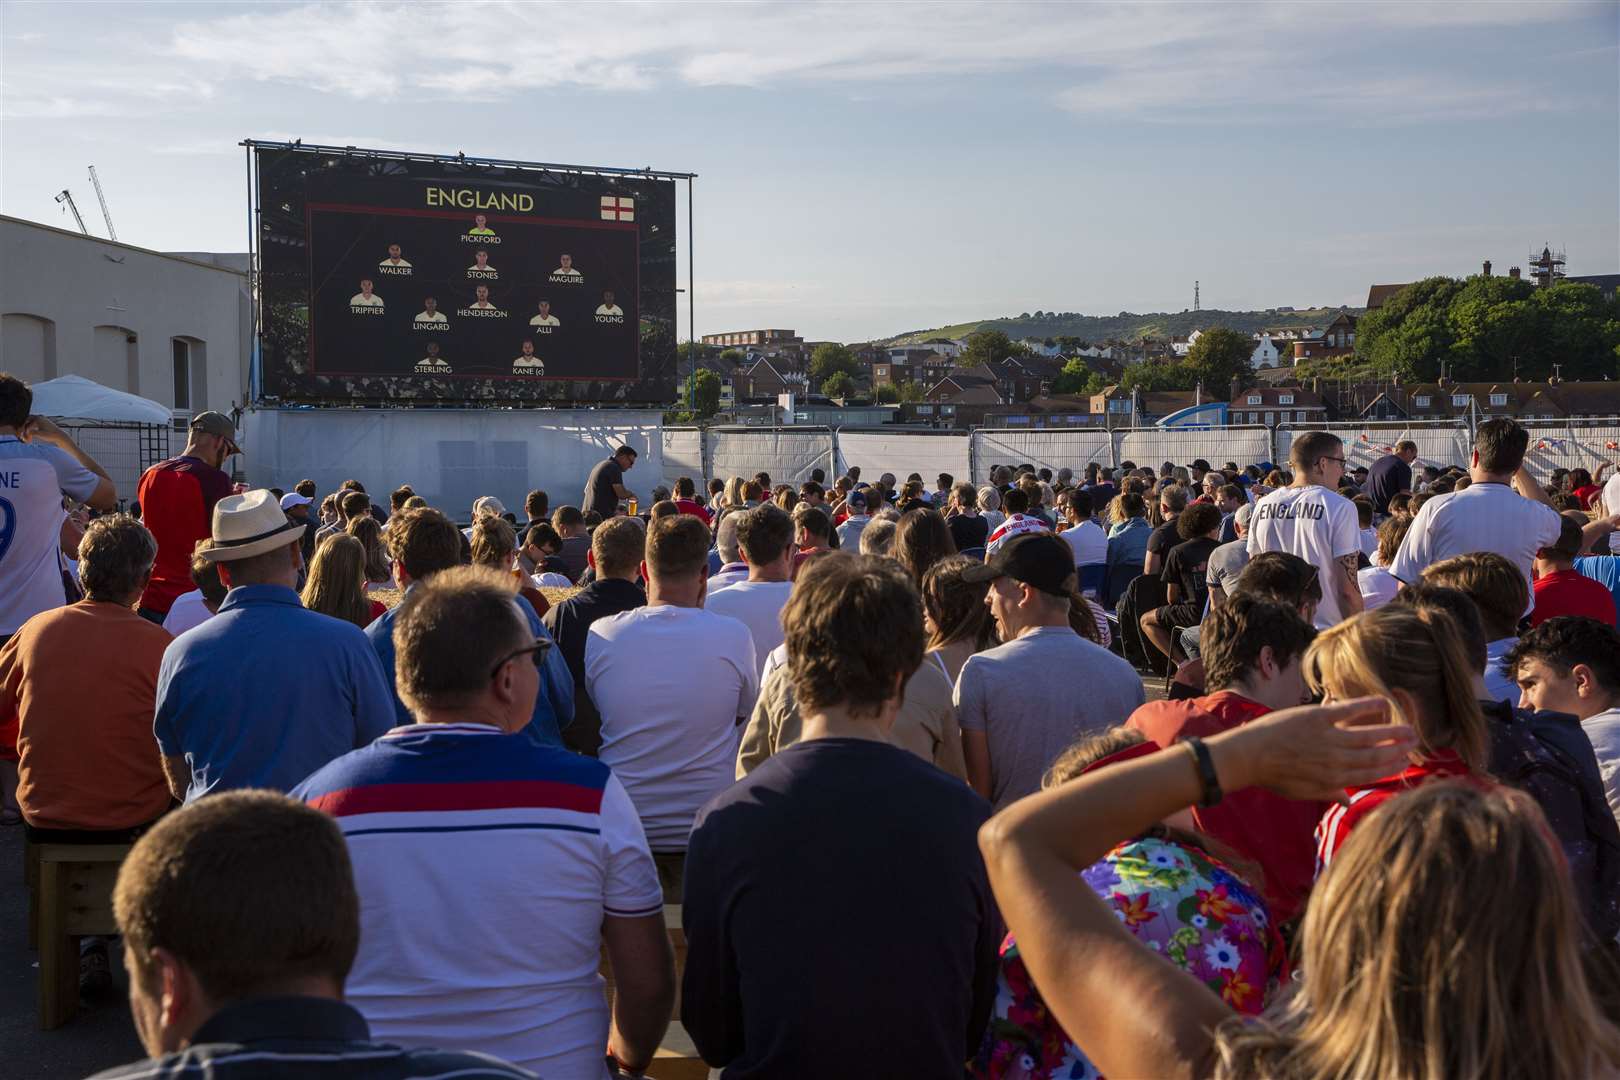 The Harbour Screen has played several sports matches, including the England Vs Columbia game in last year's world cup (13732737)